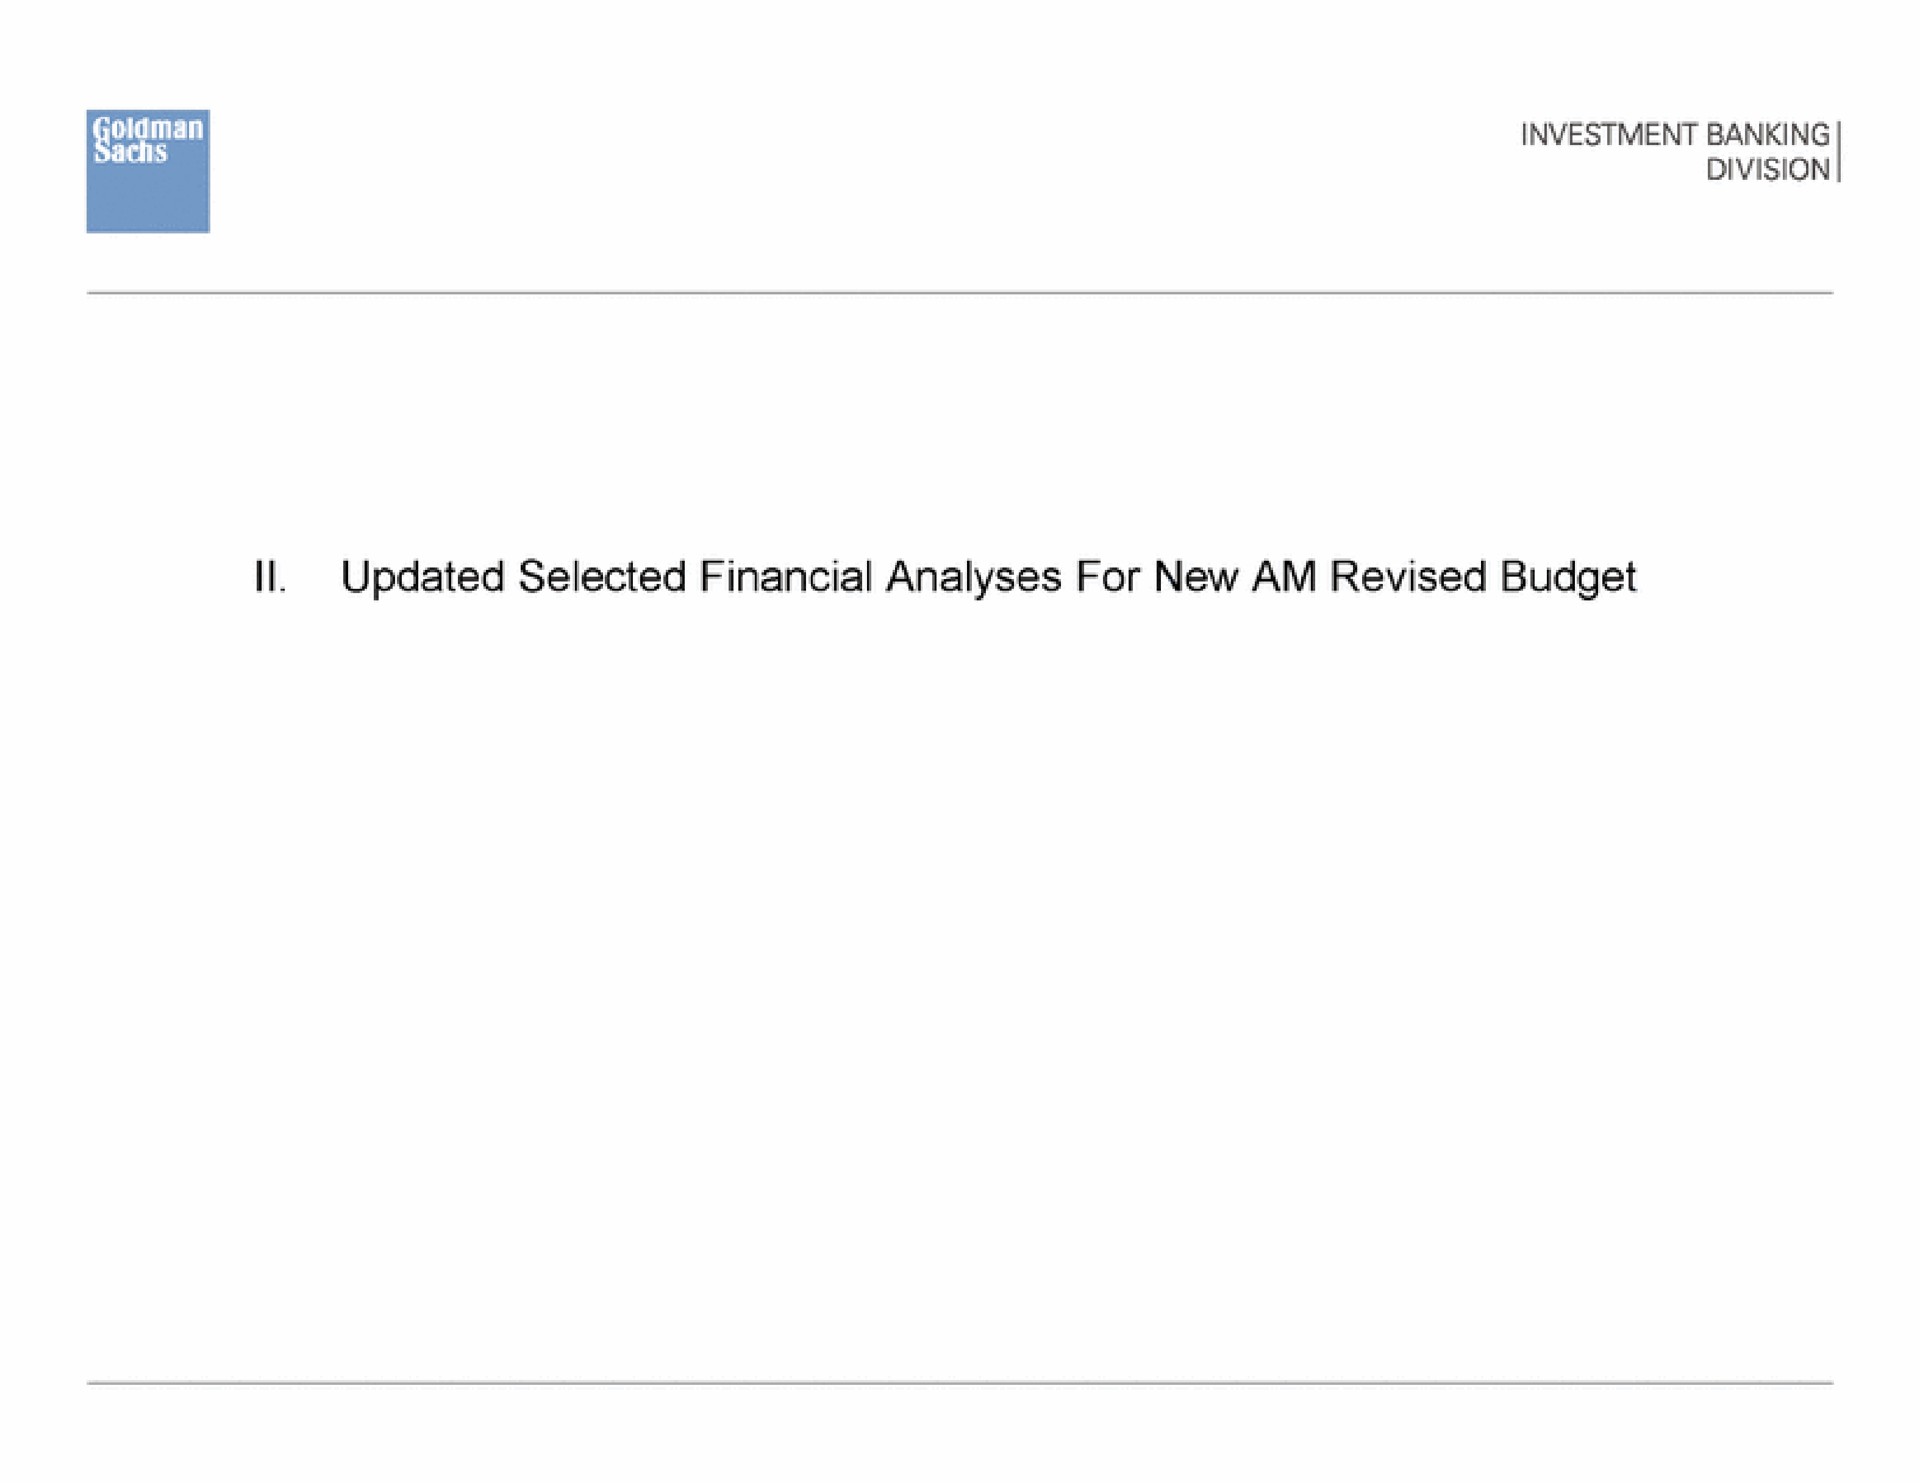 updated selected financial analyses for new am revised budget | Goldman Sachs